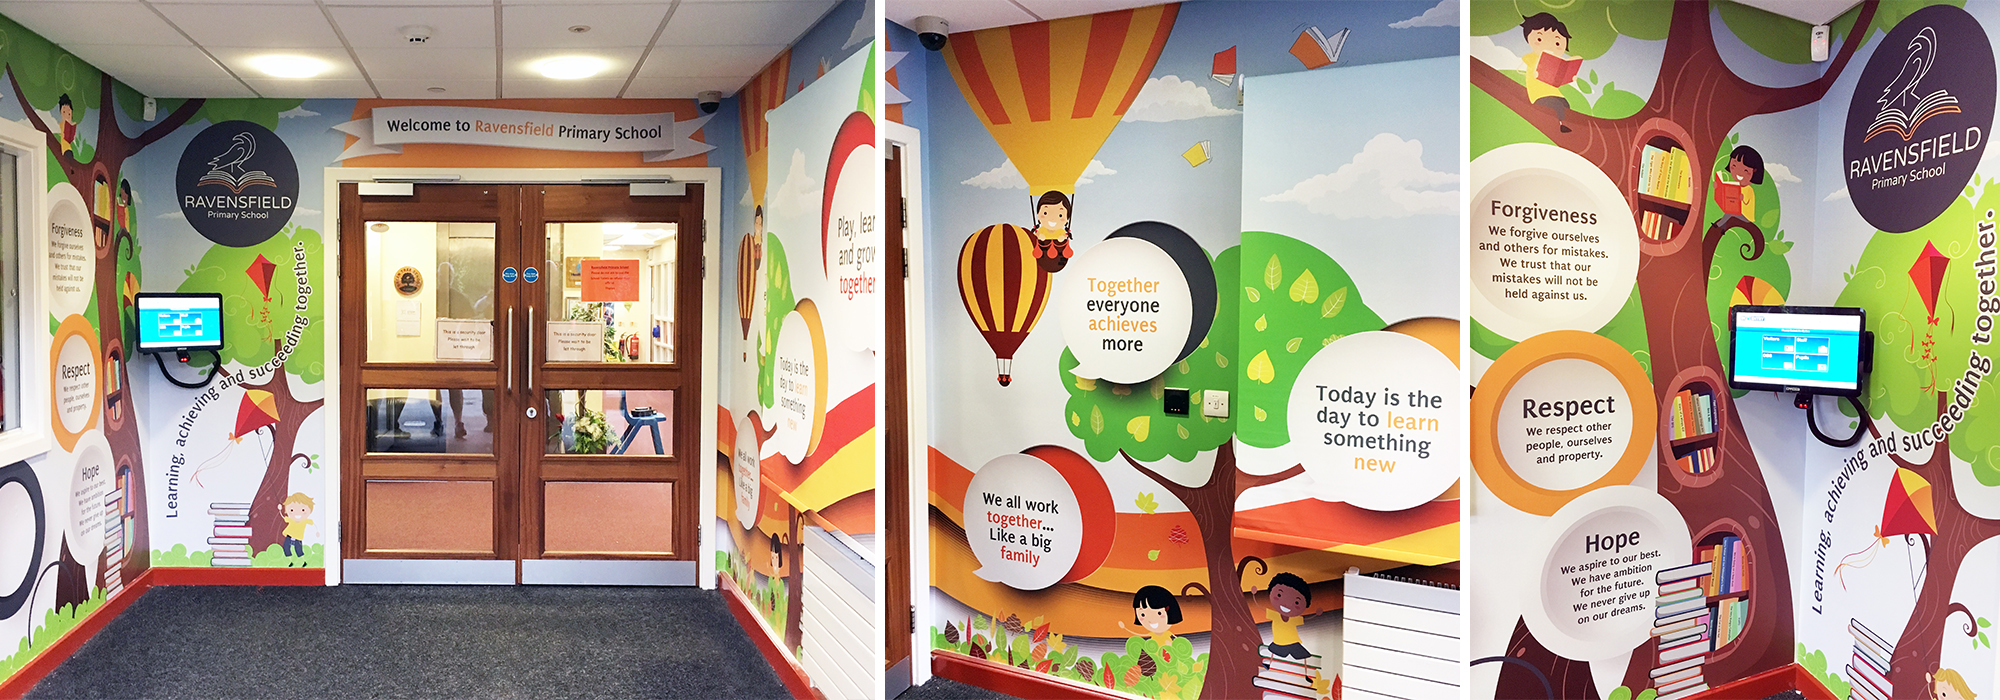 Wall vinyls for Ravensfield Primary School welcome area entrance